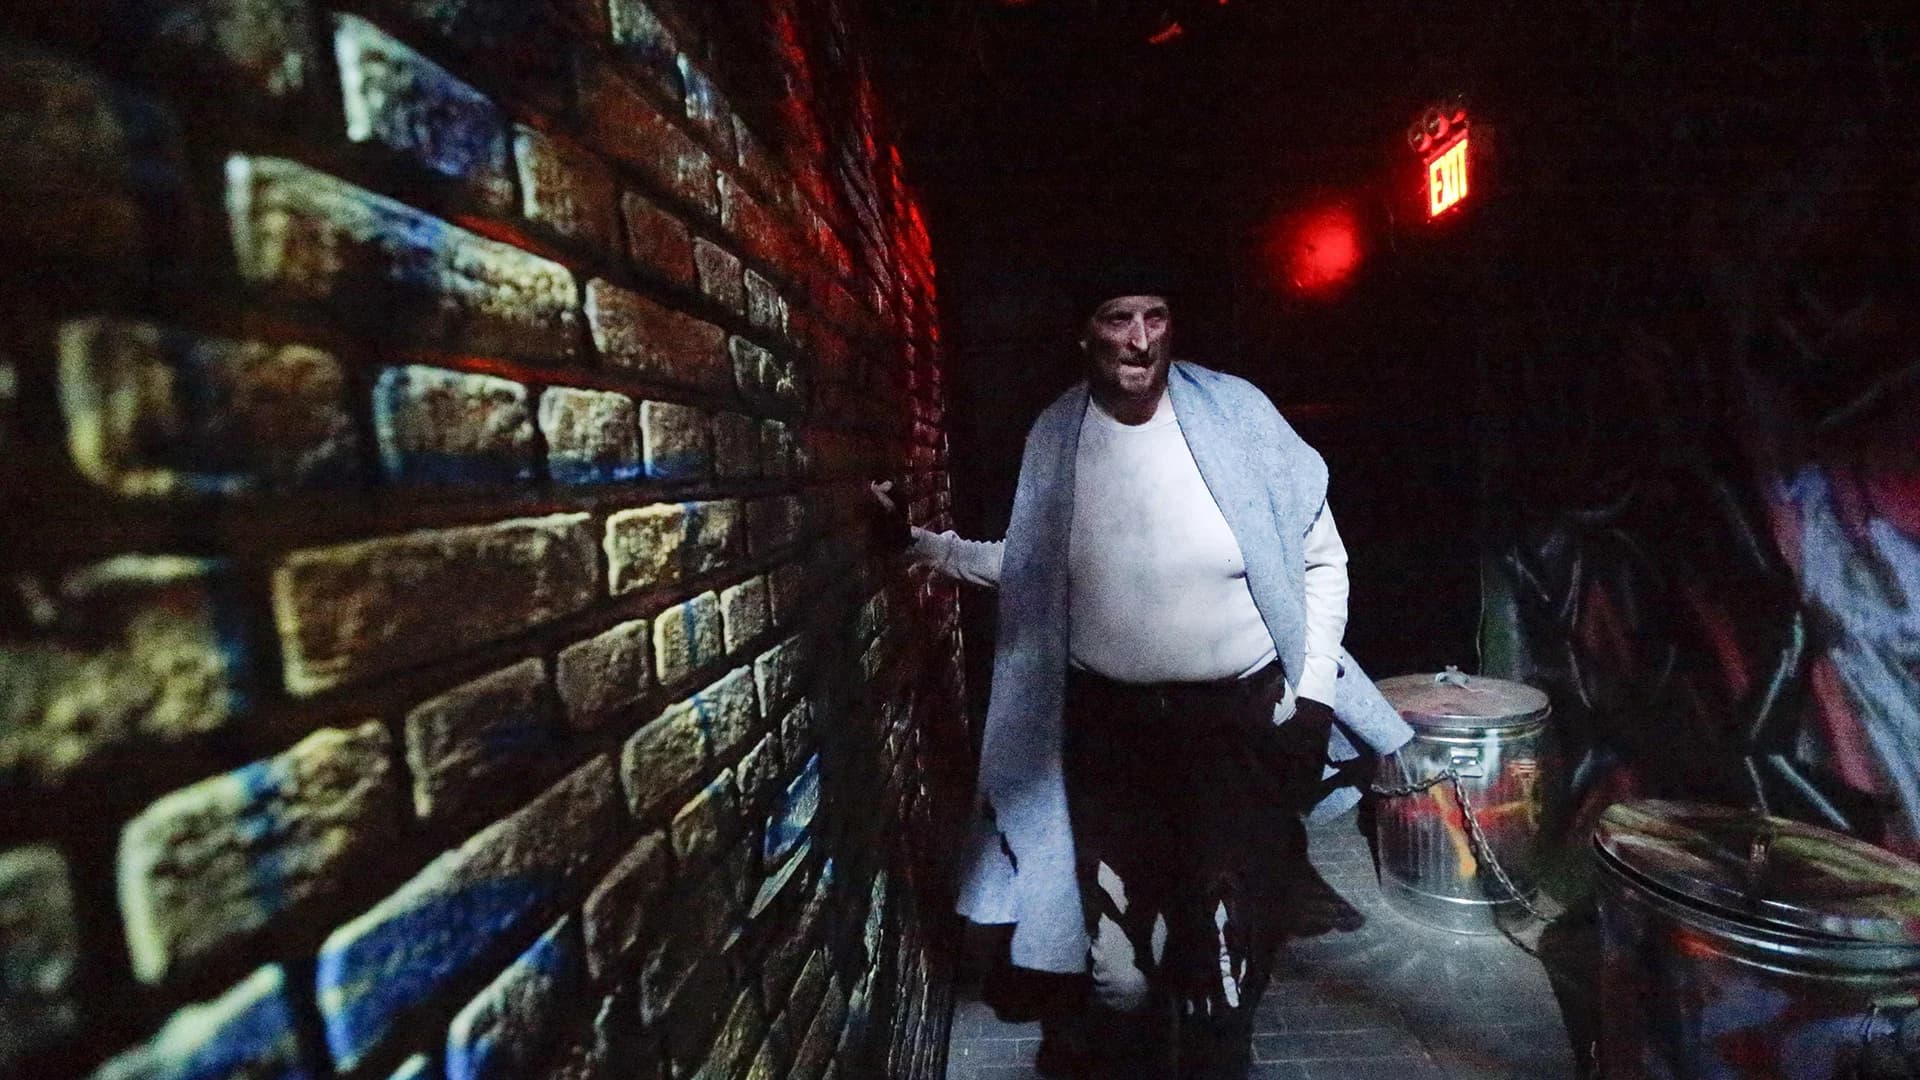 Guide: Get a good scare at these New York City Haunted Houses